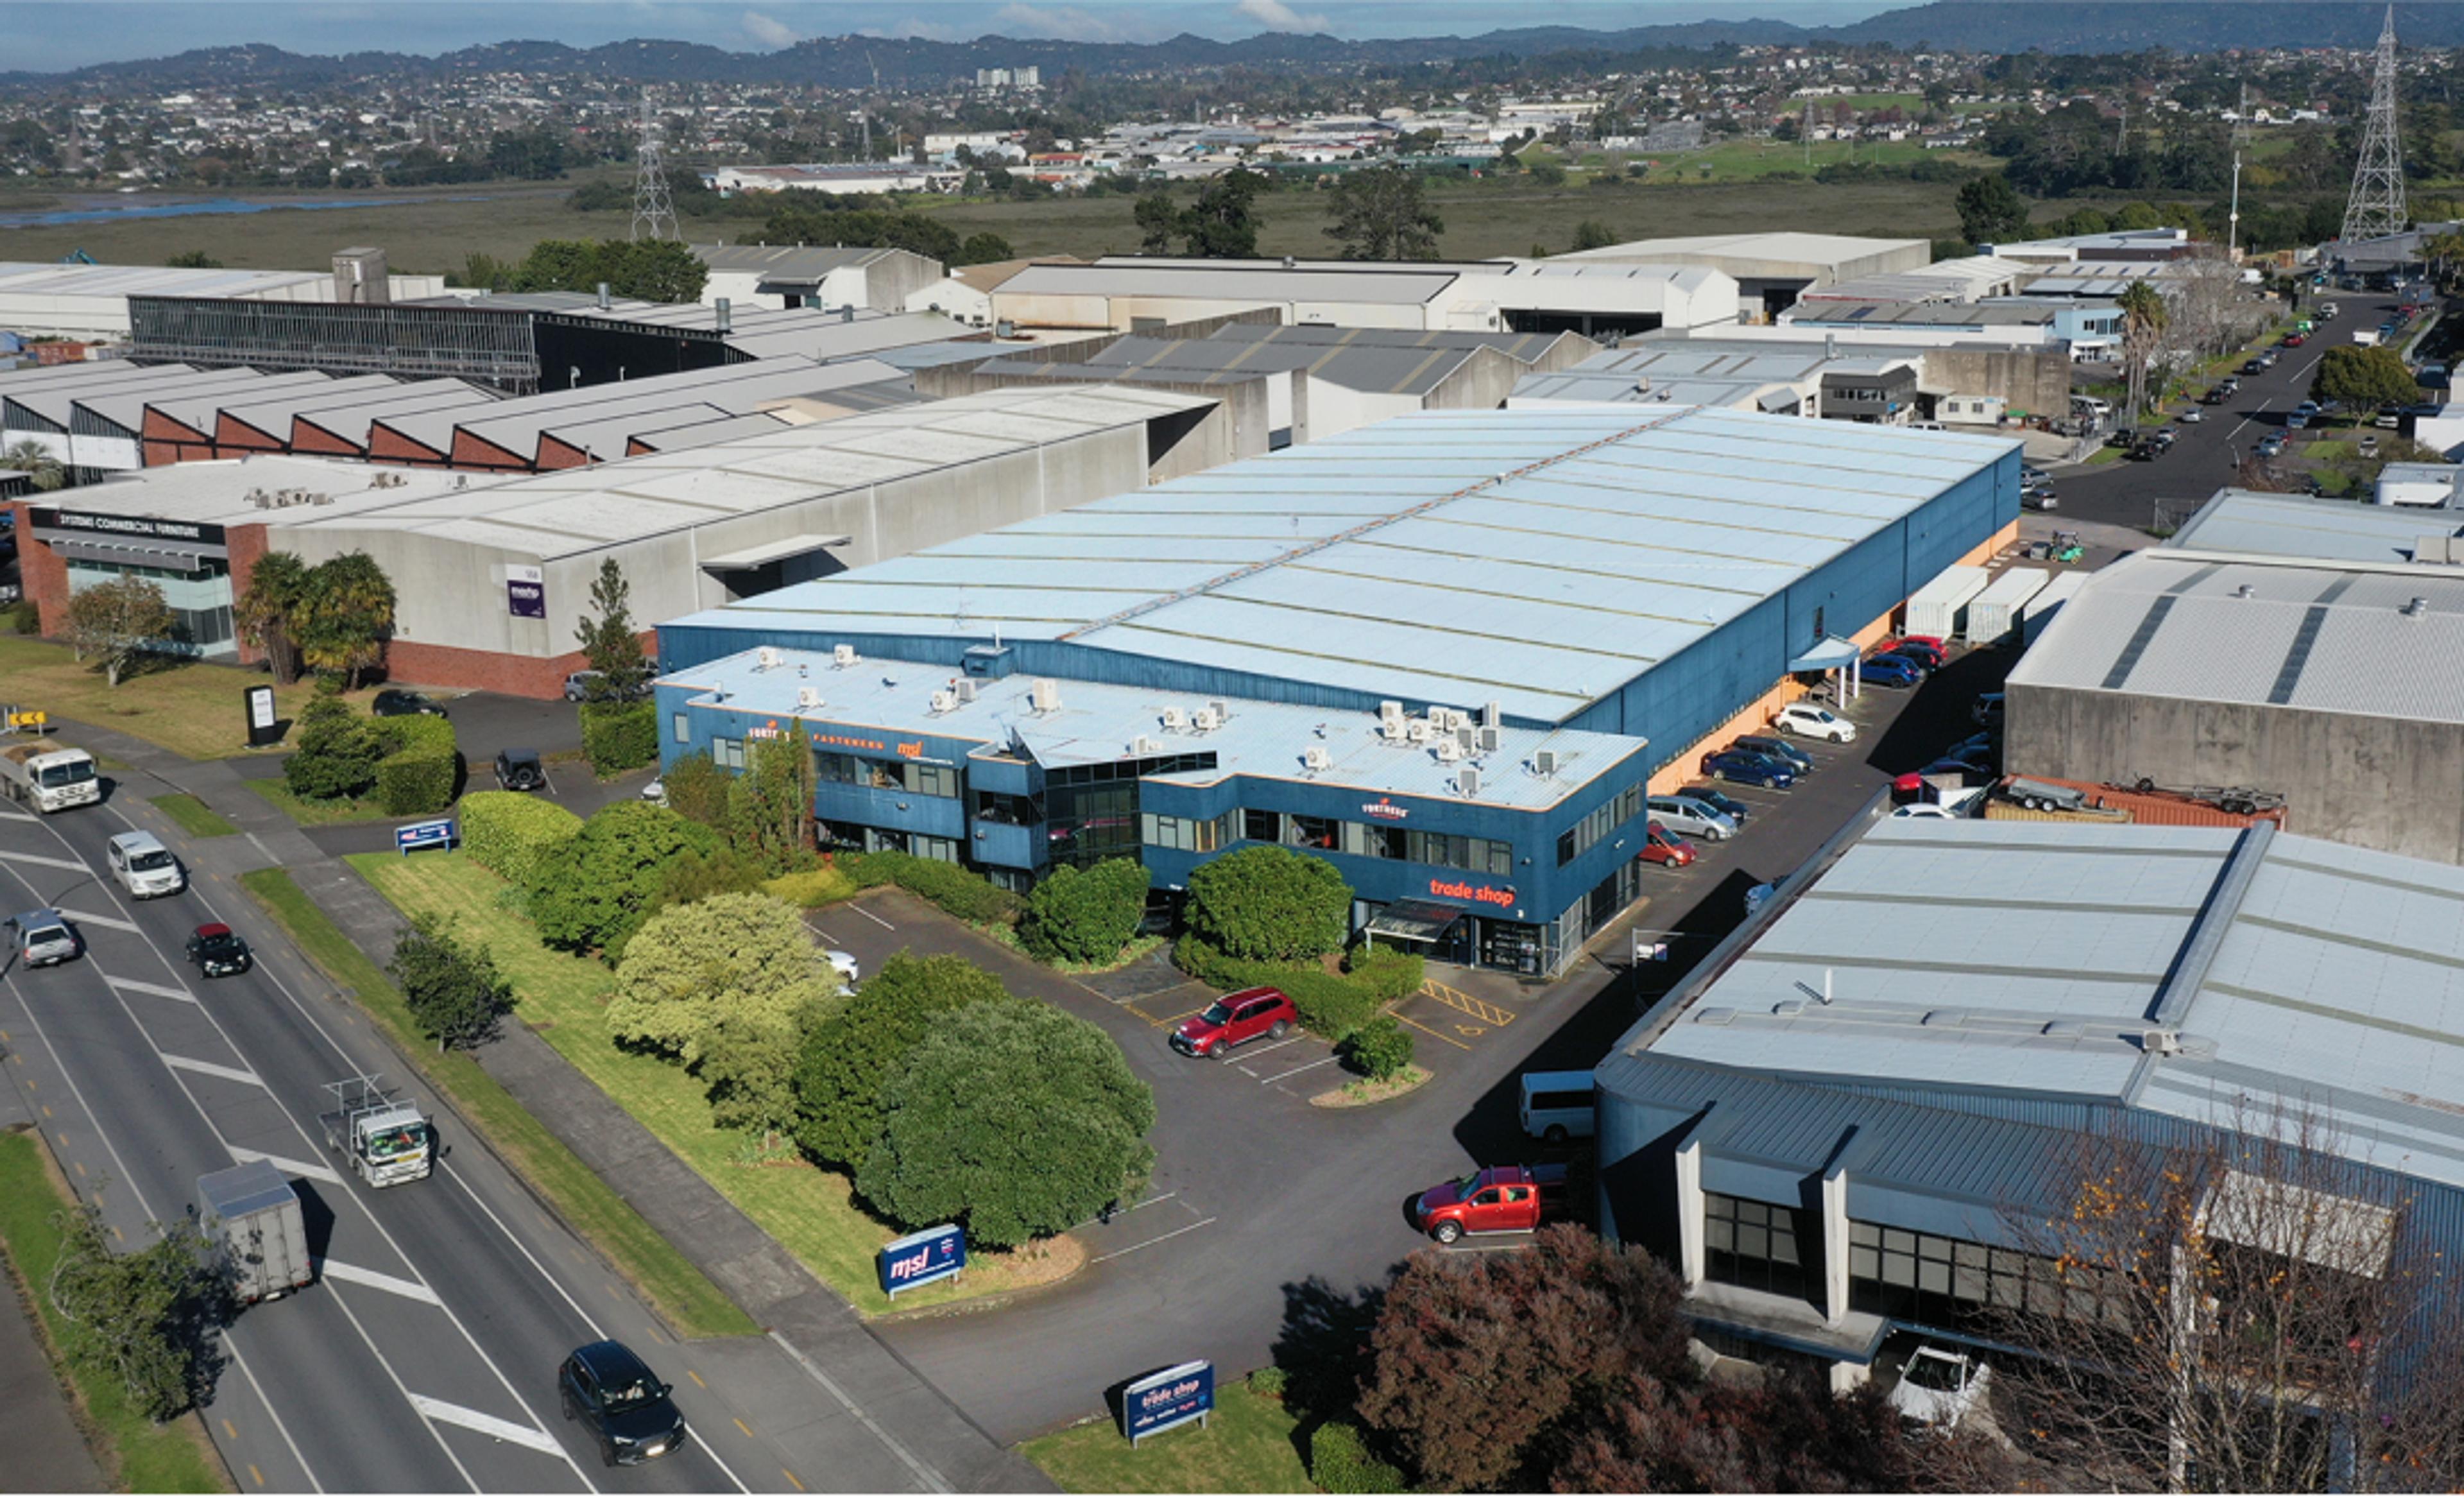 Rosebank Road is a tightly held, high-performing industrial locality close to the Auckland CBD and has excellent motorway connectivity to Auckland Airport.